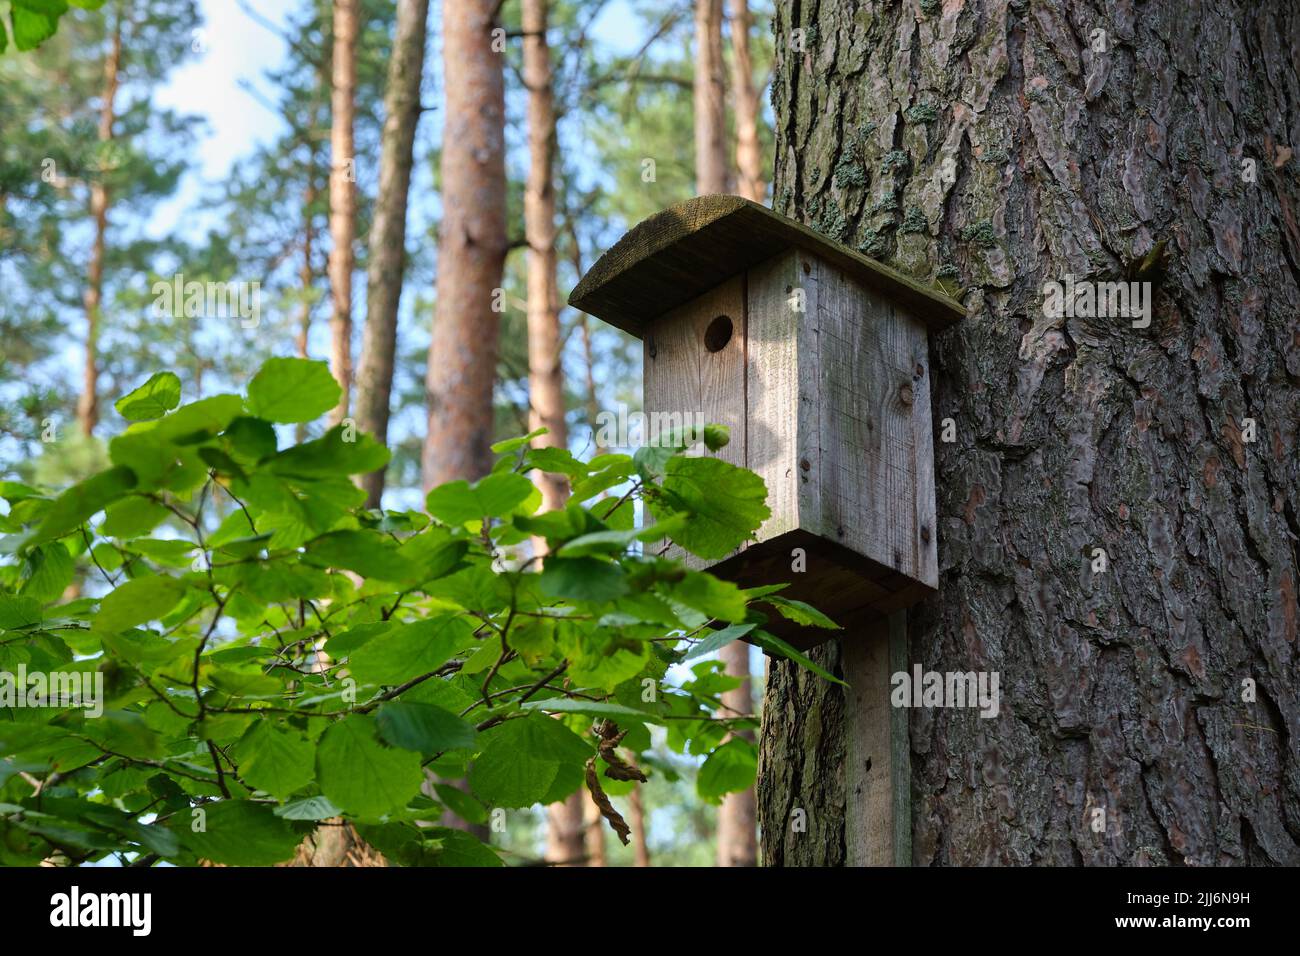 Bird house on a old tree. Wooden birdhouse, nesting box for songbirds in park or forest. Stock Photo